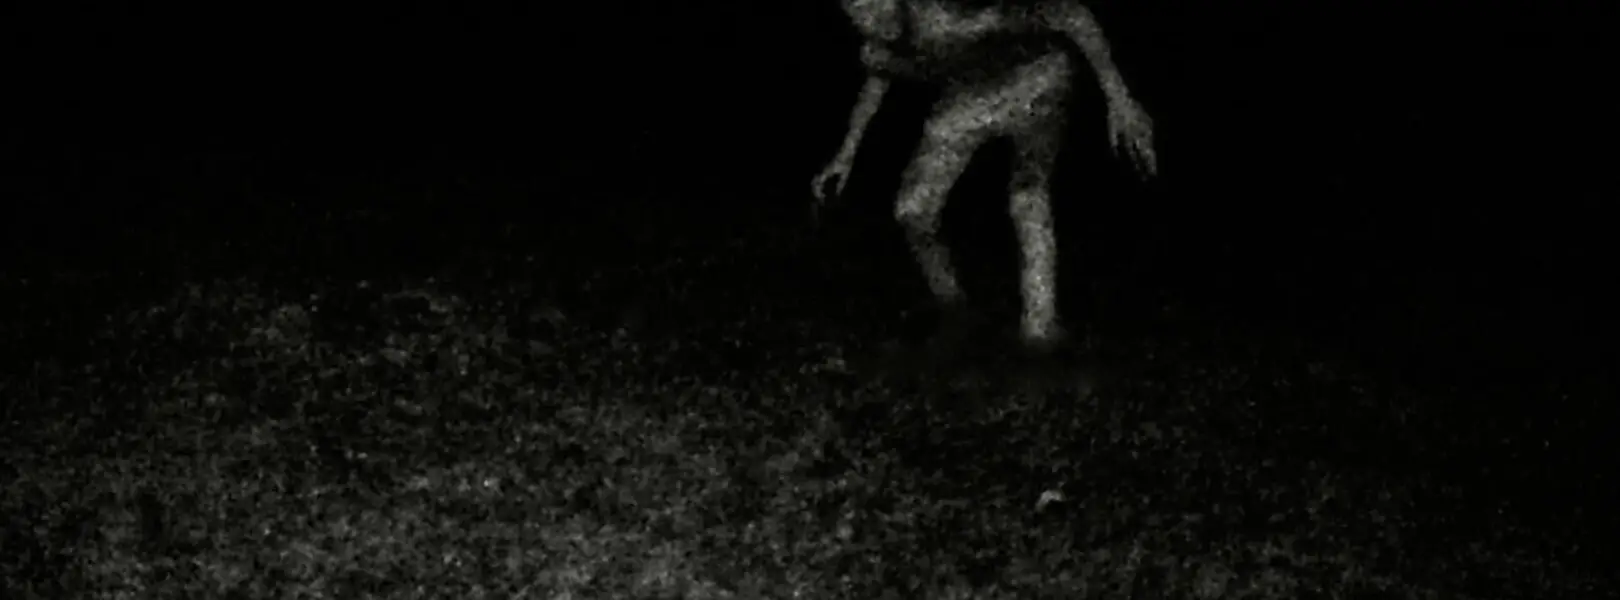 The Rake. An in depth look at one of Creepypasta's scariest